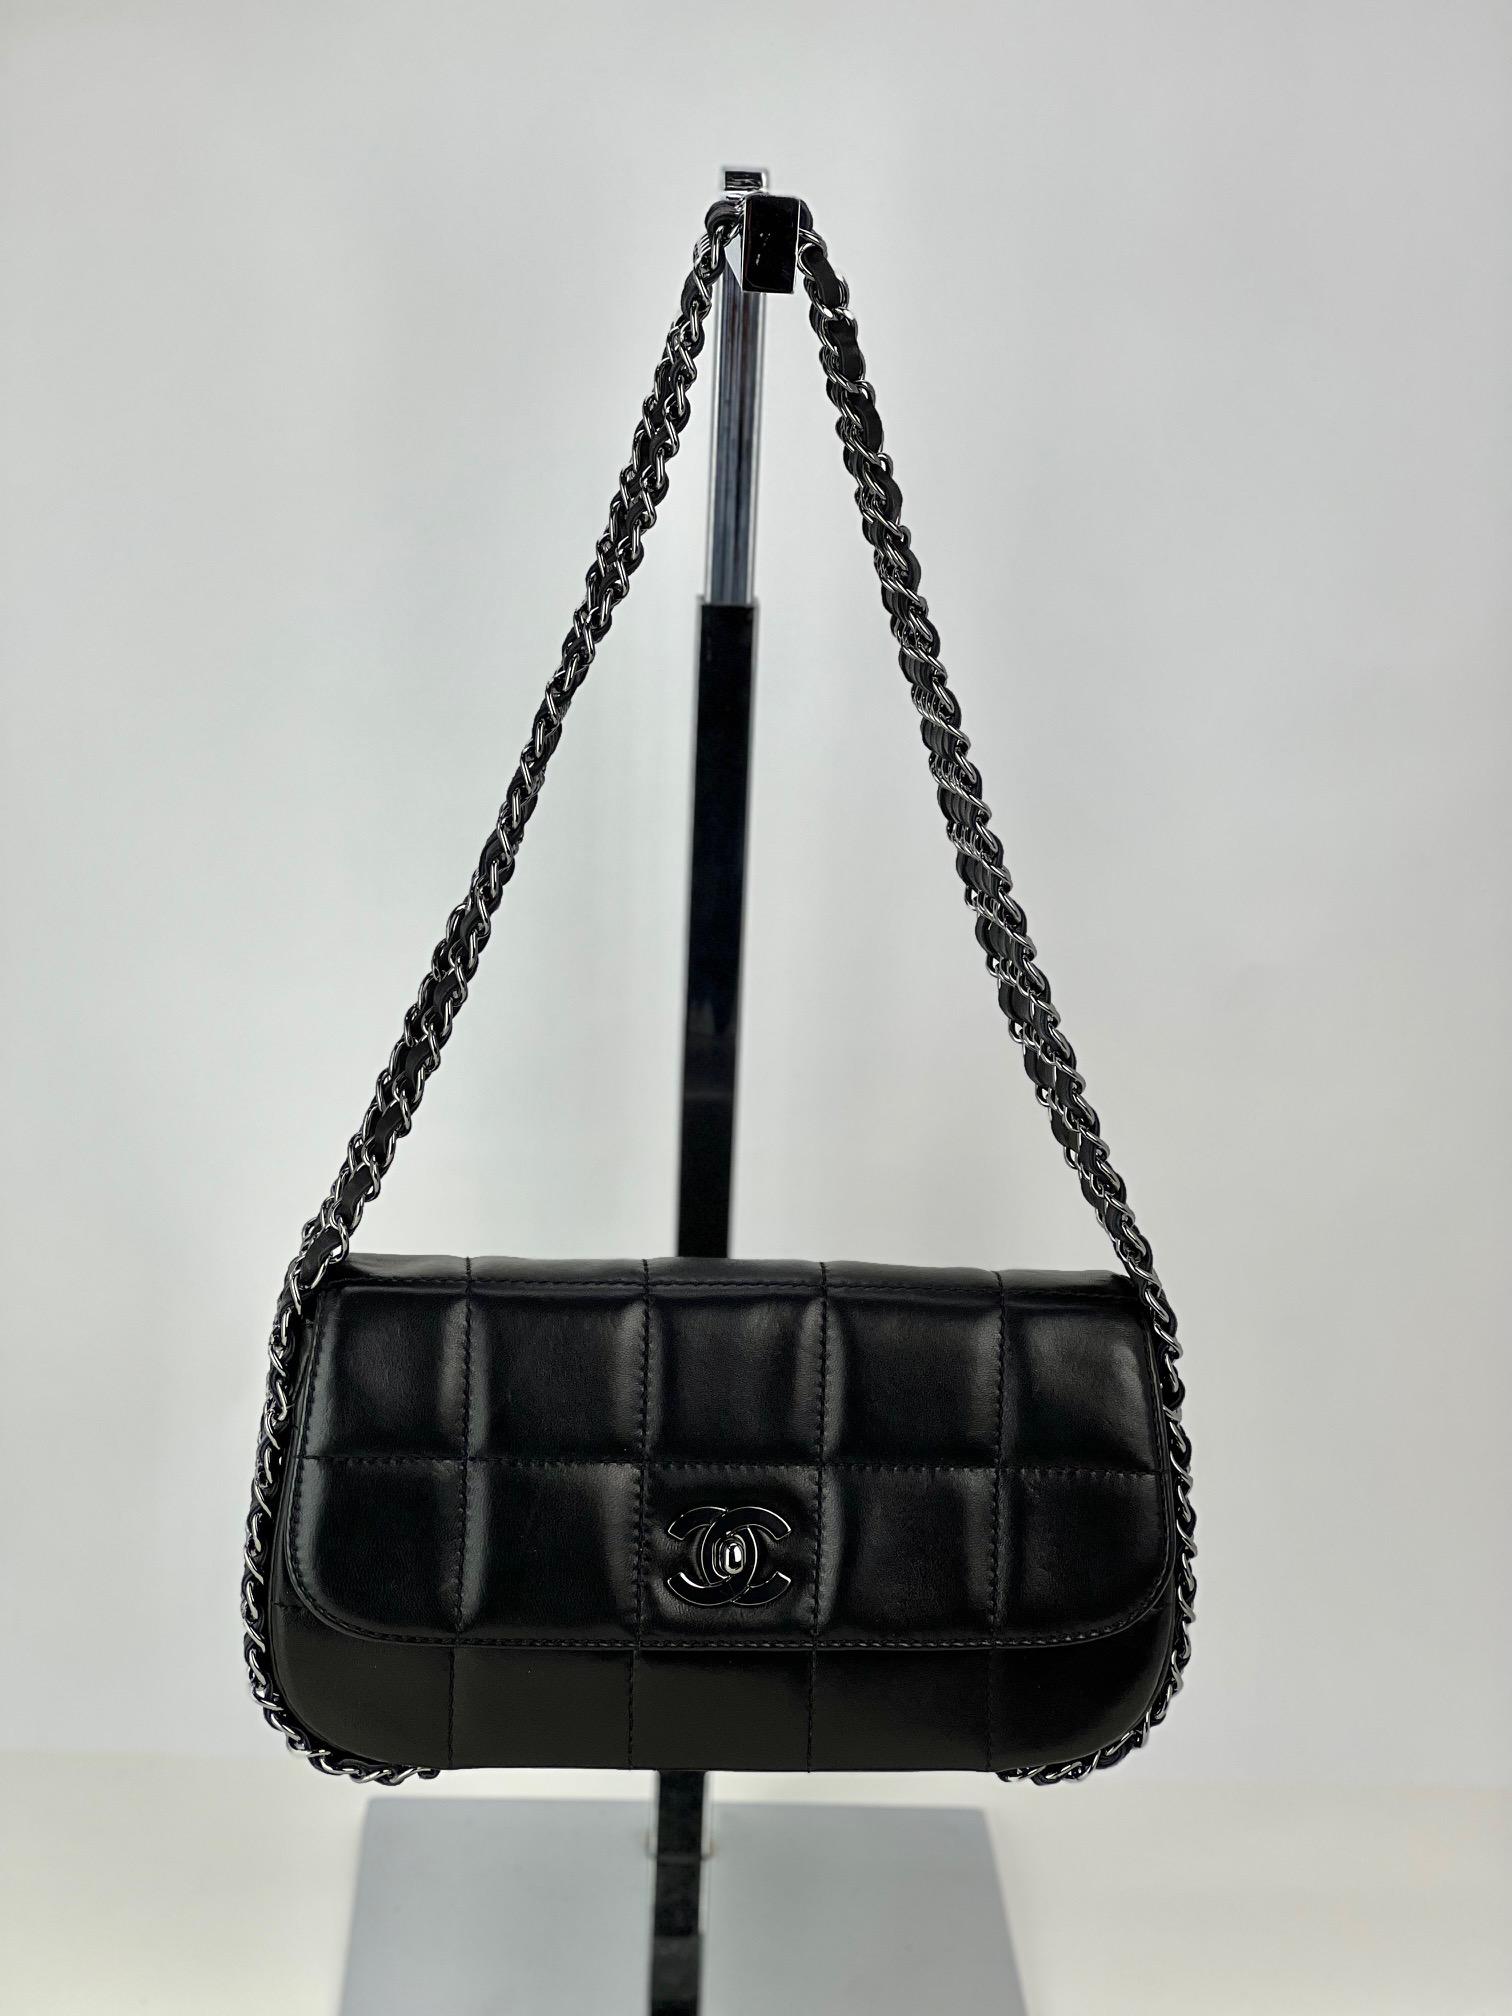 CHANEL Chocolate Bar Quilted Lambskin 5 Chain Flap Black Bag 4